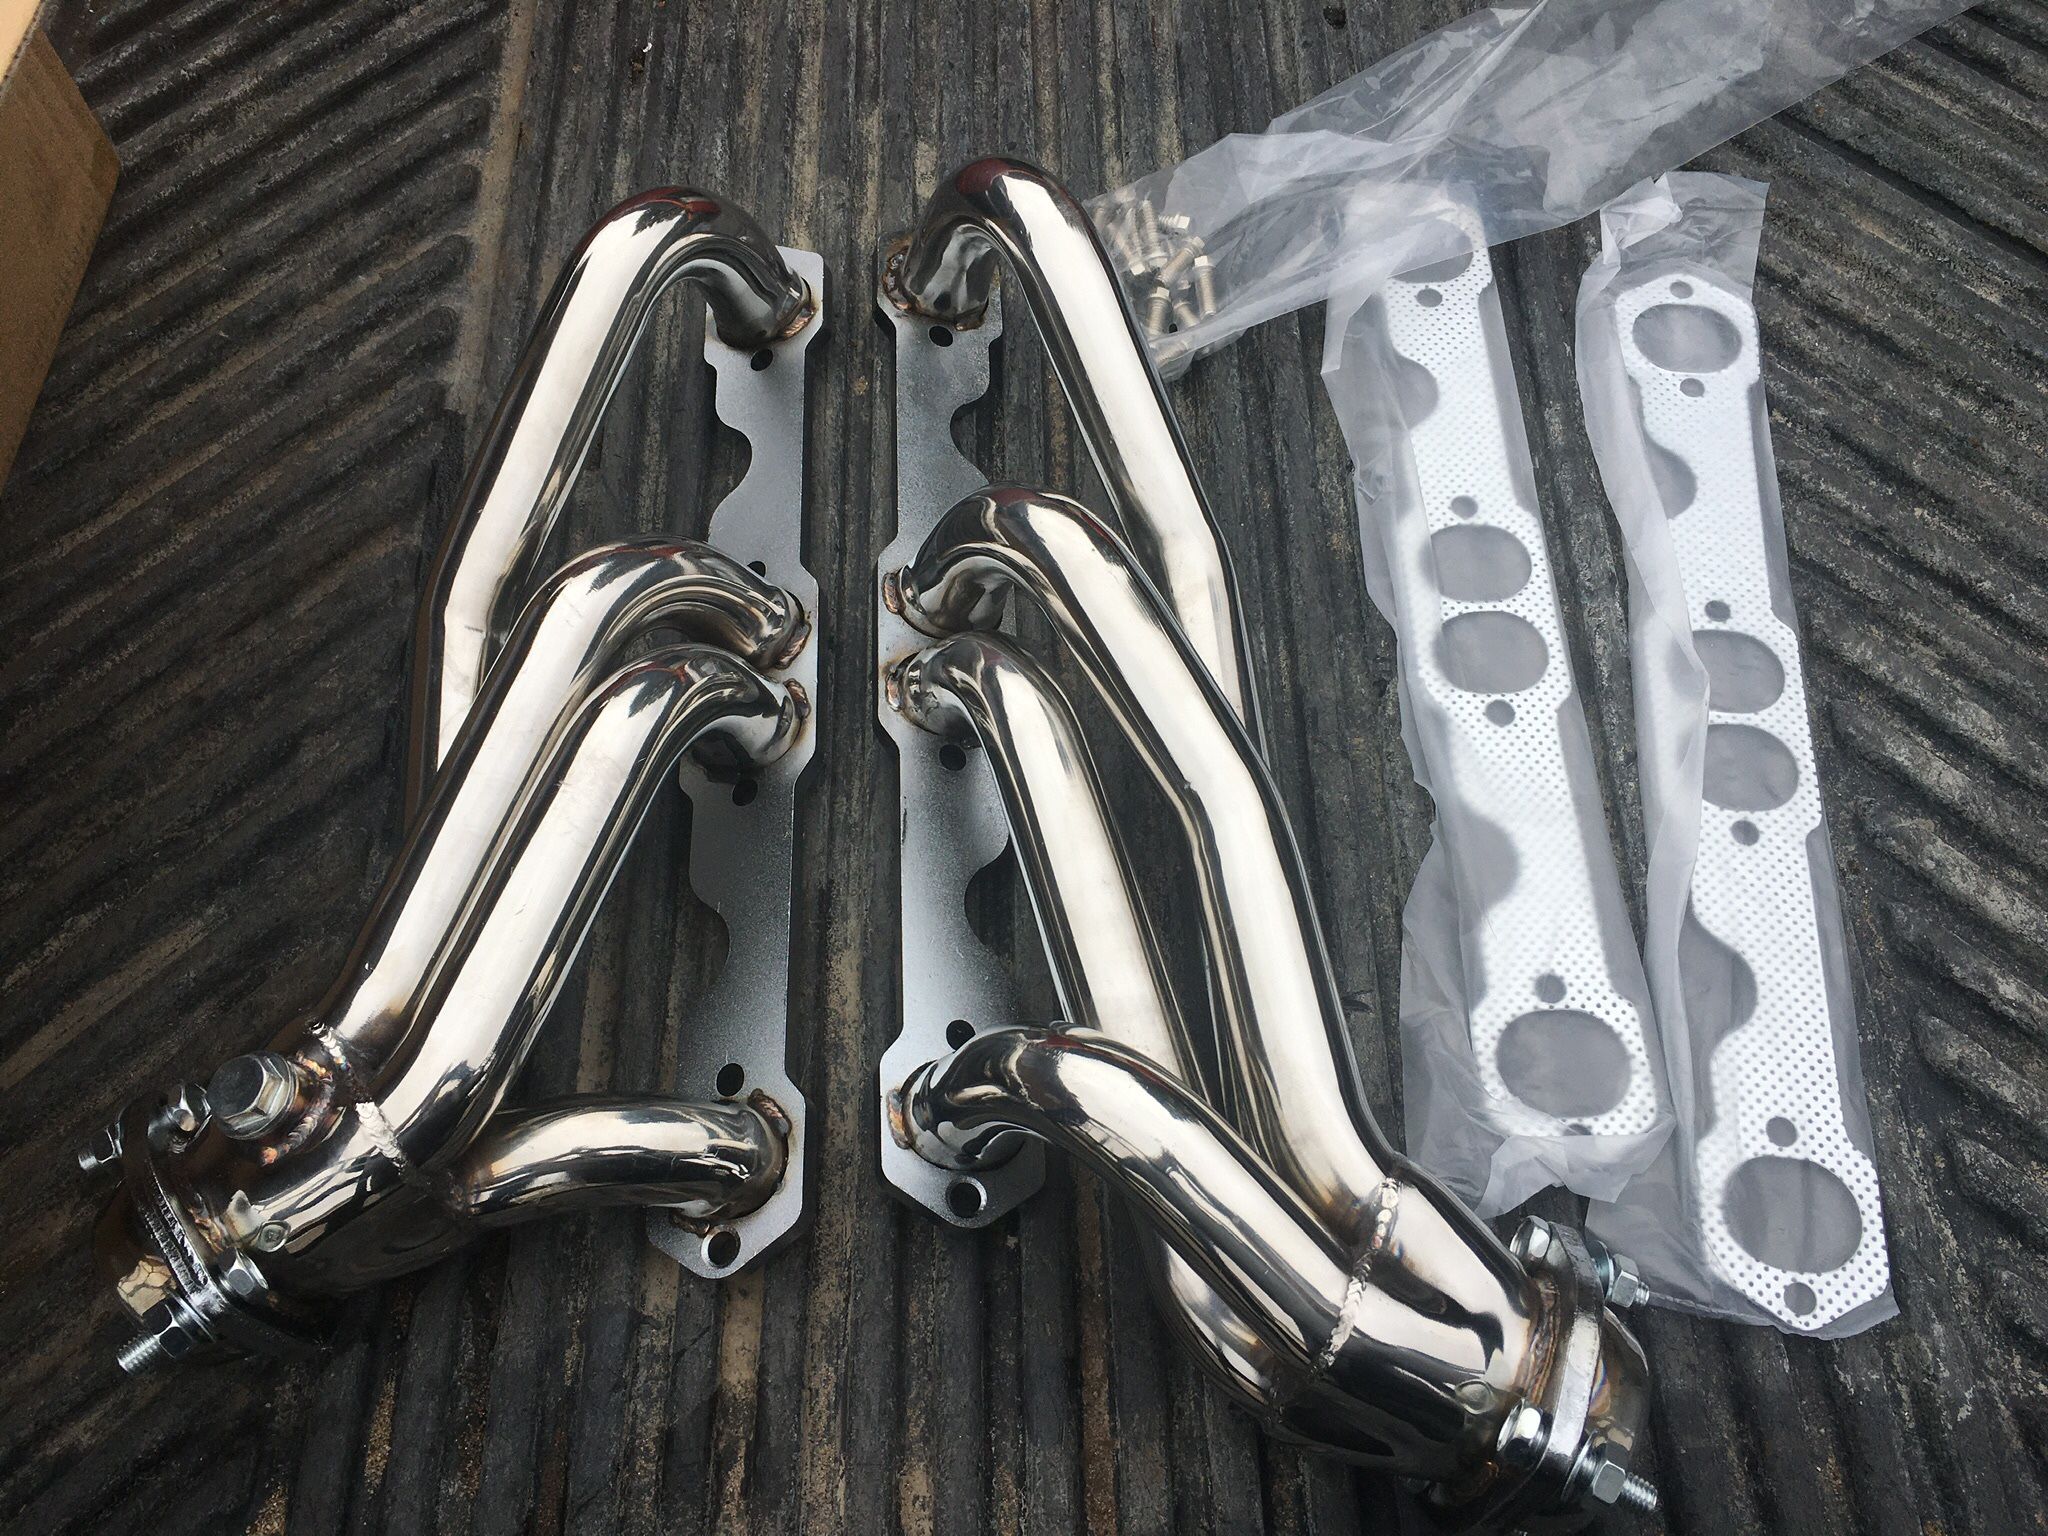 97 Chevy K 1500 Headers for a small block Chevy